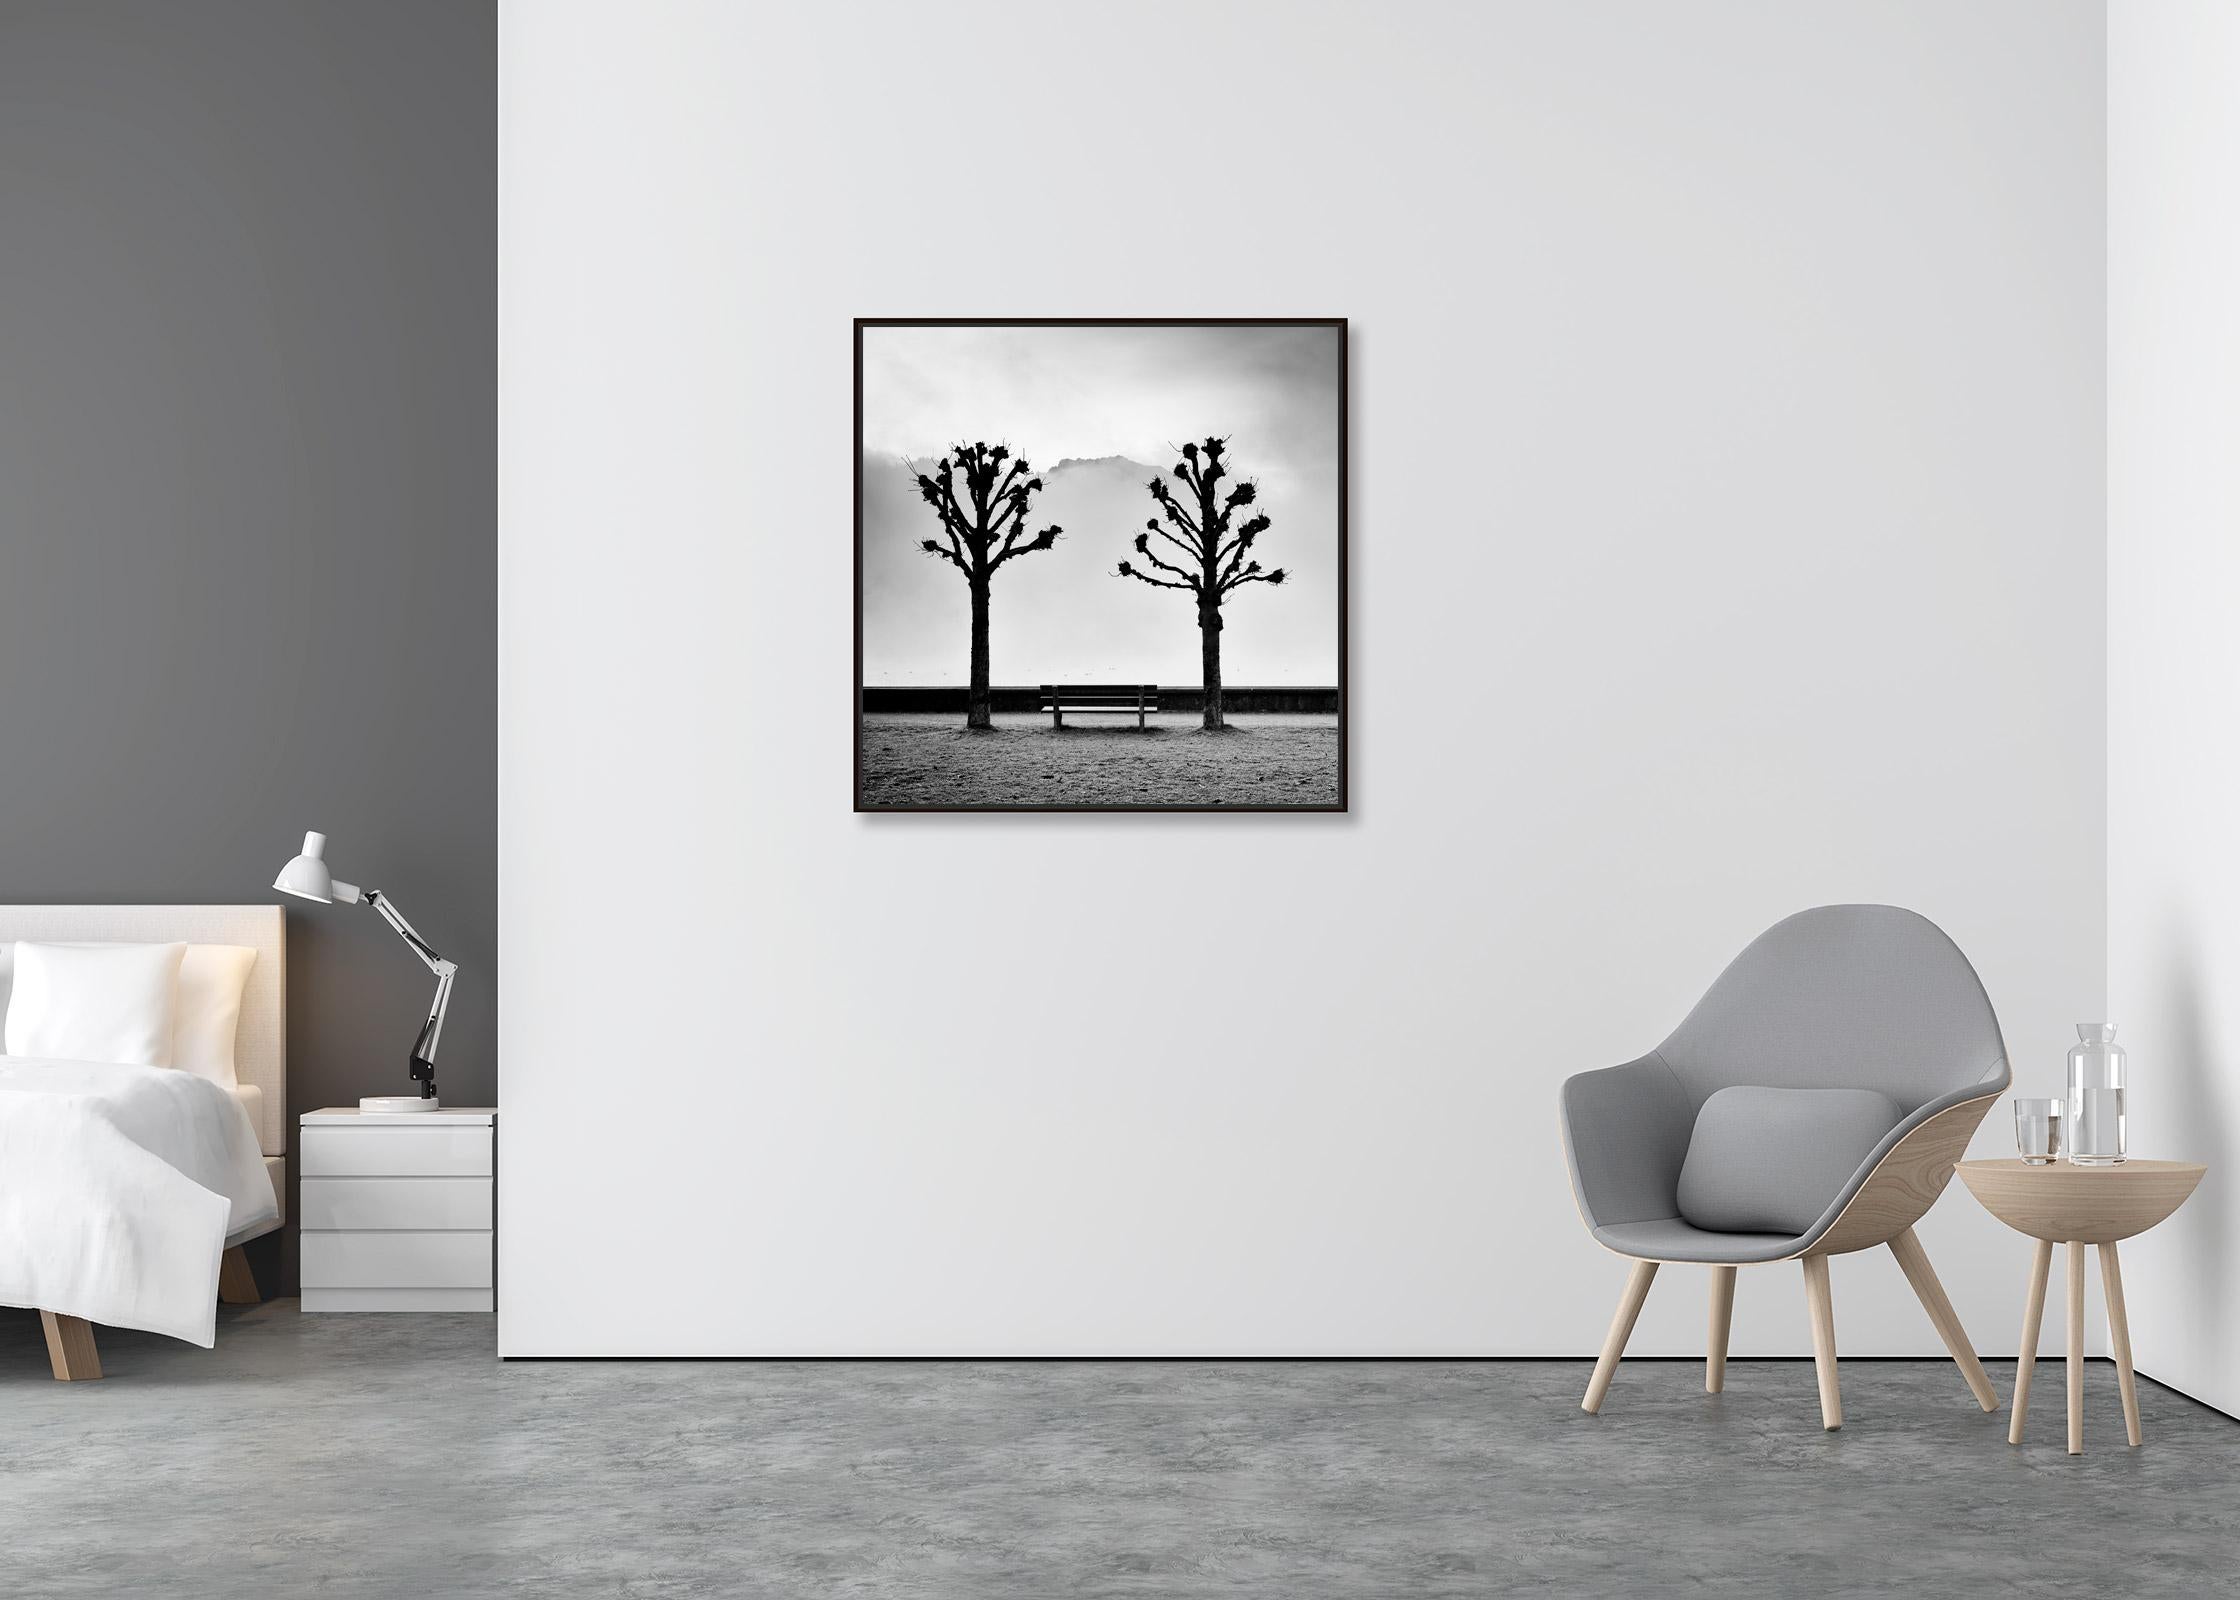 Chestnut Trees on the Promenade, Traunsee, b&w fine art photography, landscape - Minimalist Print by Gerald Berghammer